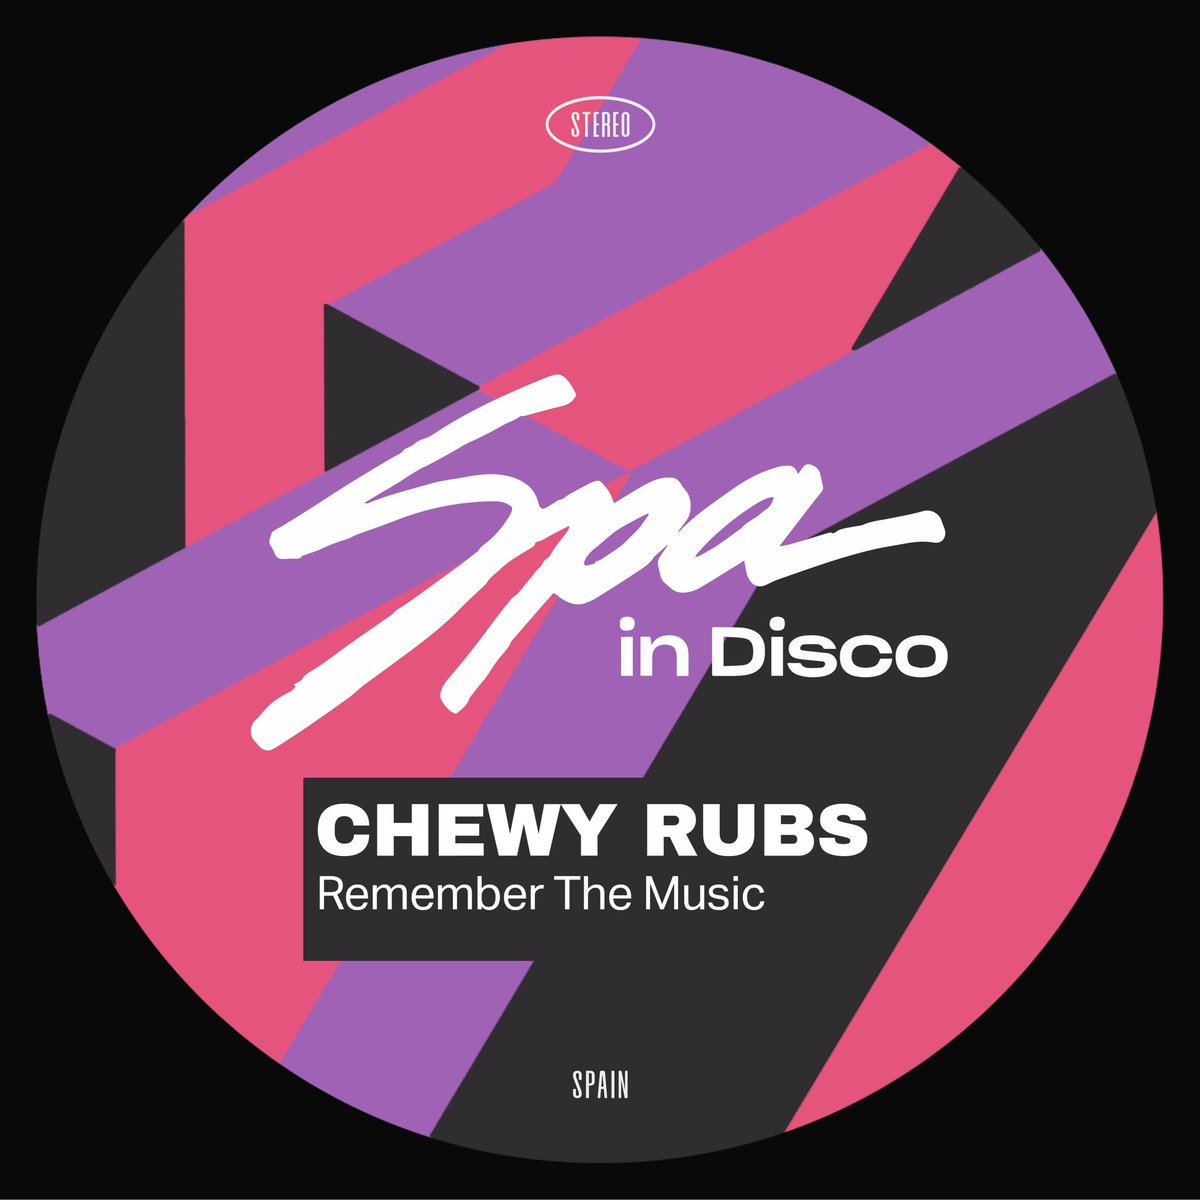 Spa In Disco [SPA335] @chewyrubs - Remember The Music Out Friday 26 April on @traxsource promo, get your copy; 
.
traxsource.com/title/2225668/… 
.
Soundcloud: soundcloud.com/spa-in-disco/s… 
.
#spaindisco #chewyrubs #disco #nudisco #funkyhouse #rememberthemusic #single #electronicmusic